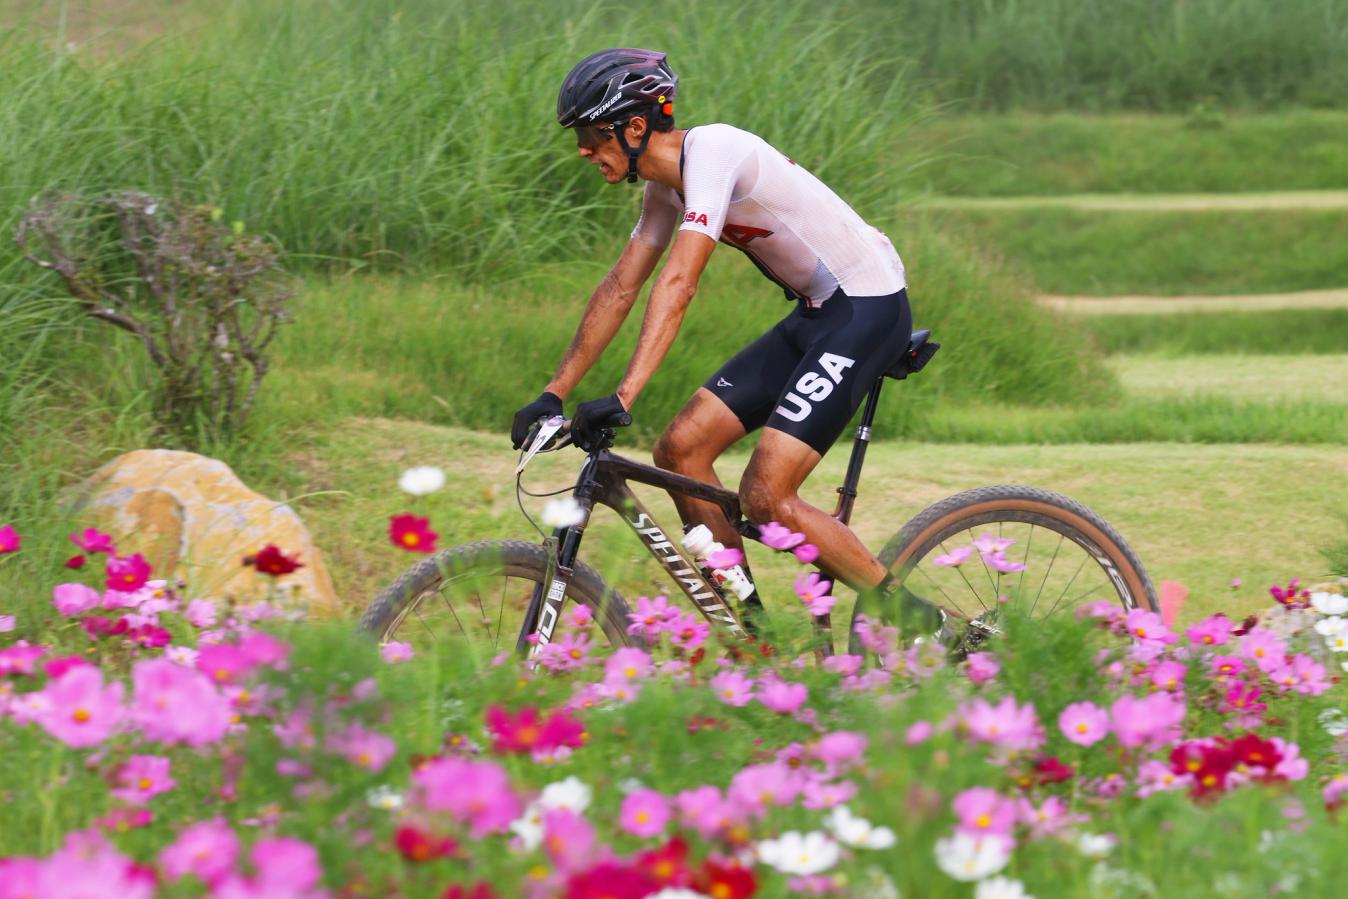 Chris Blevins riding at the 2020 Tokyo Olympic cross-country race